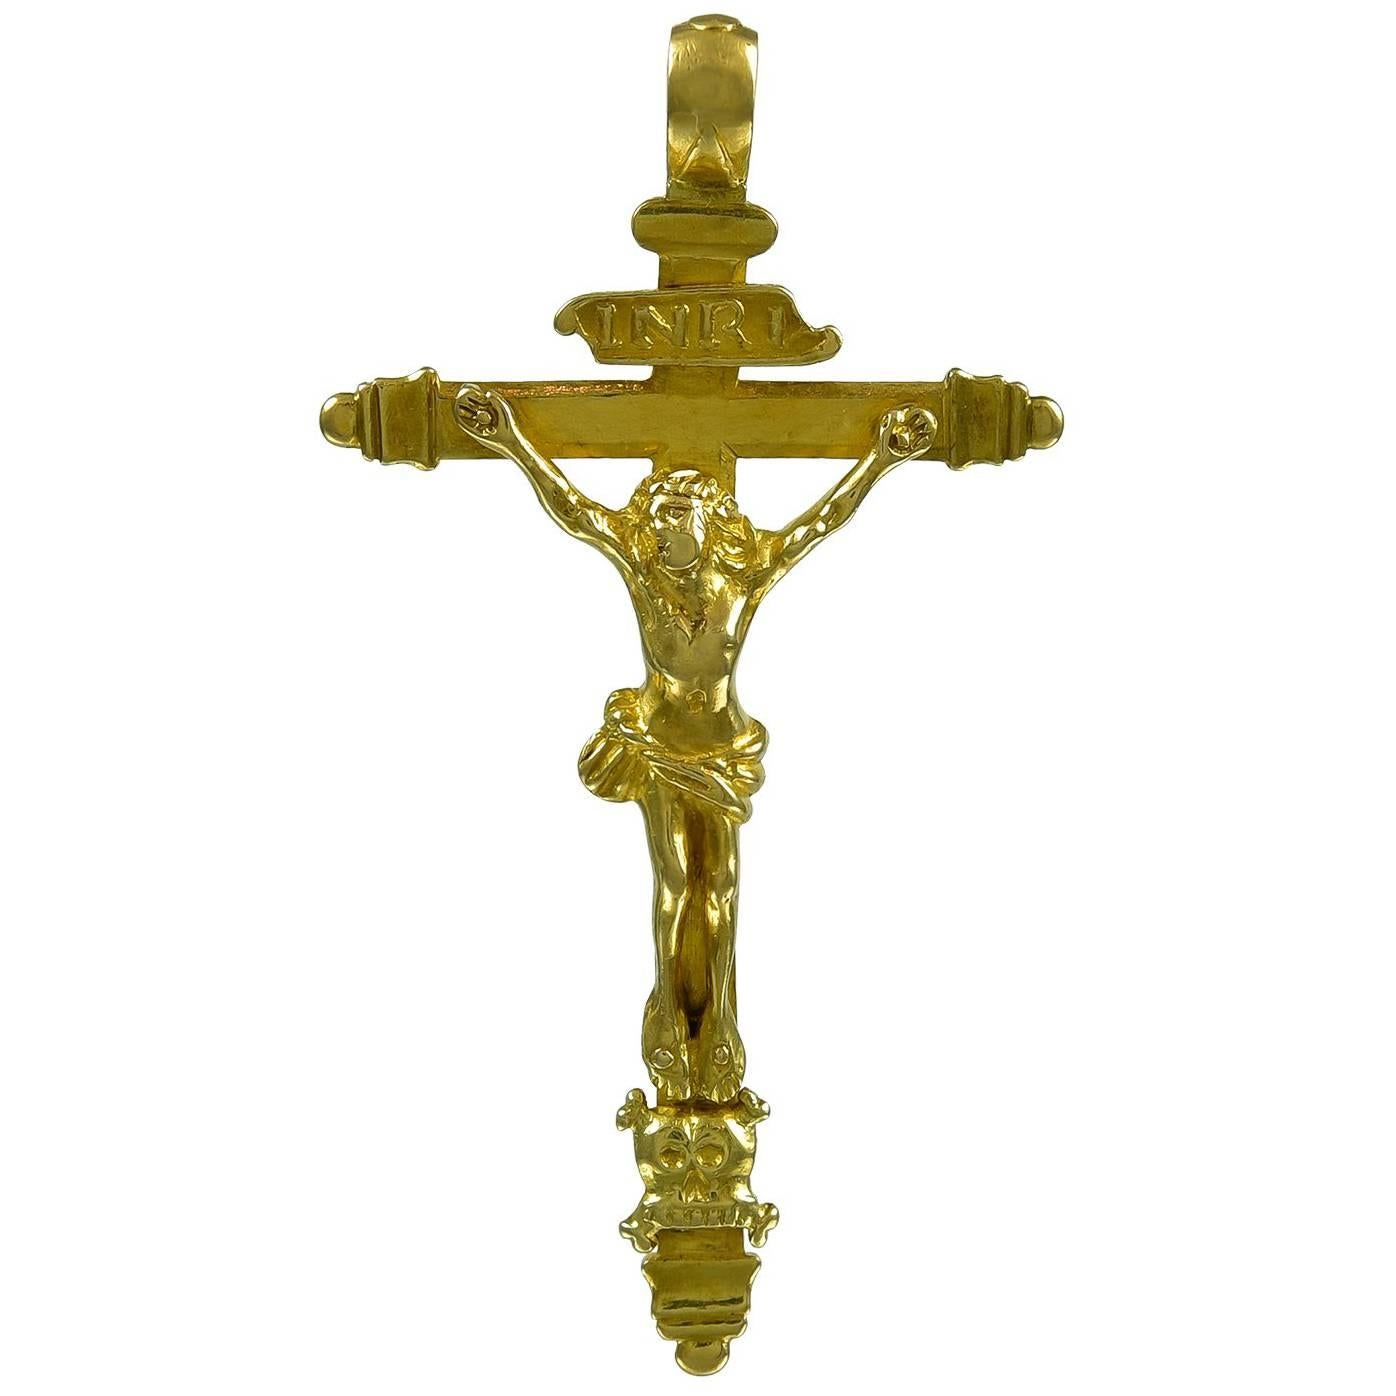 Much Cherished Gold Crucifix from the Mid-18th Century